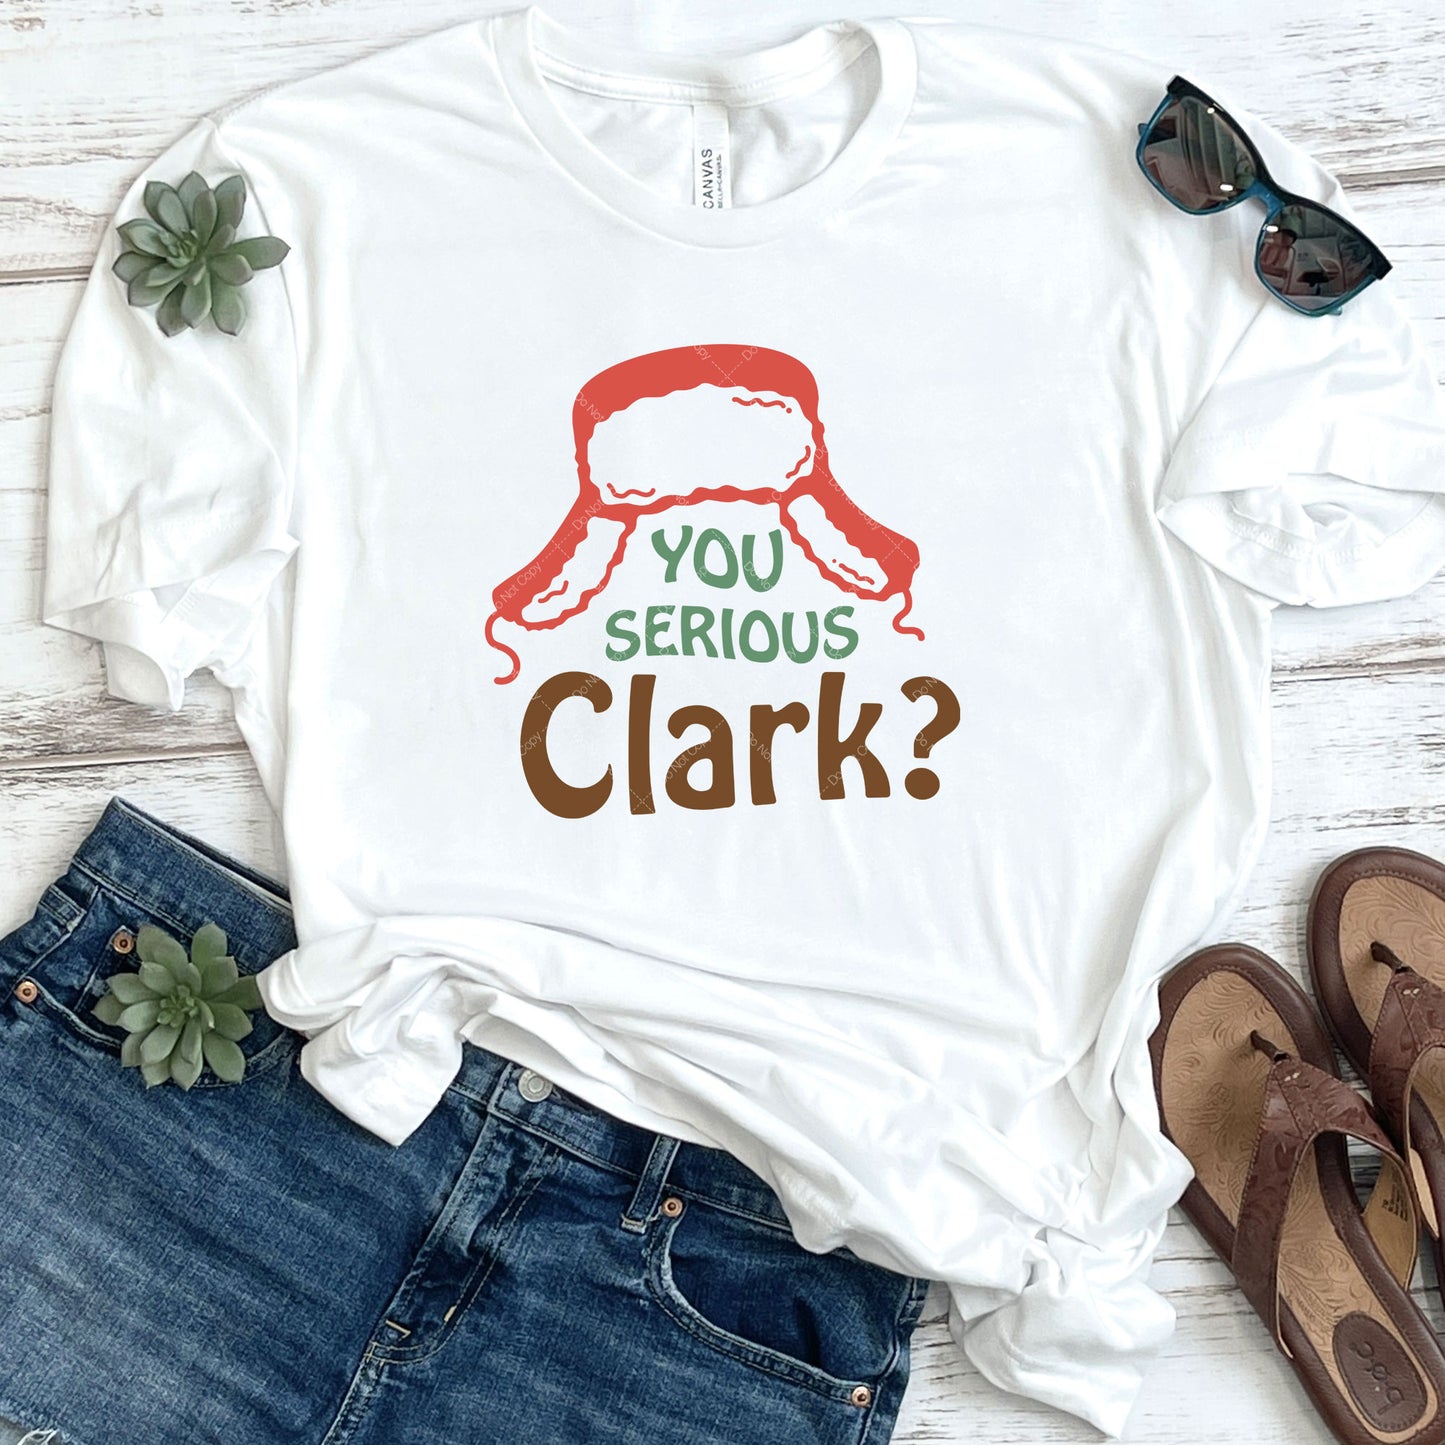 Are You Serious Clark? DTF